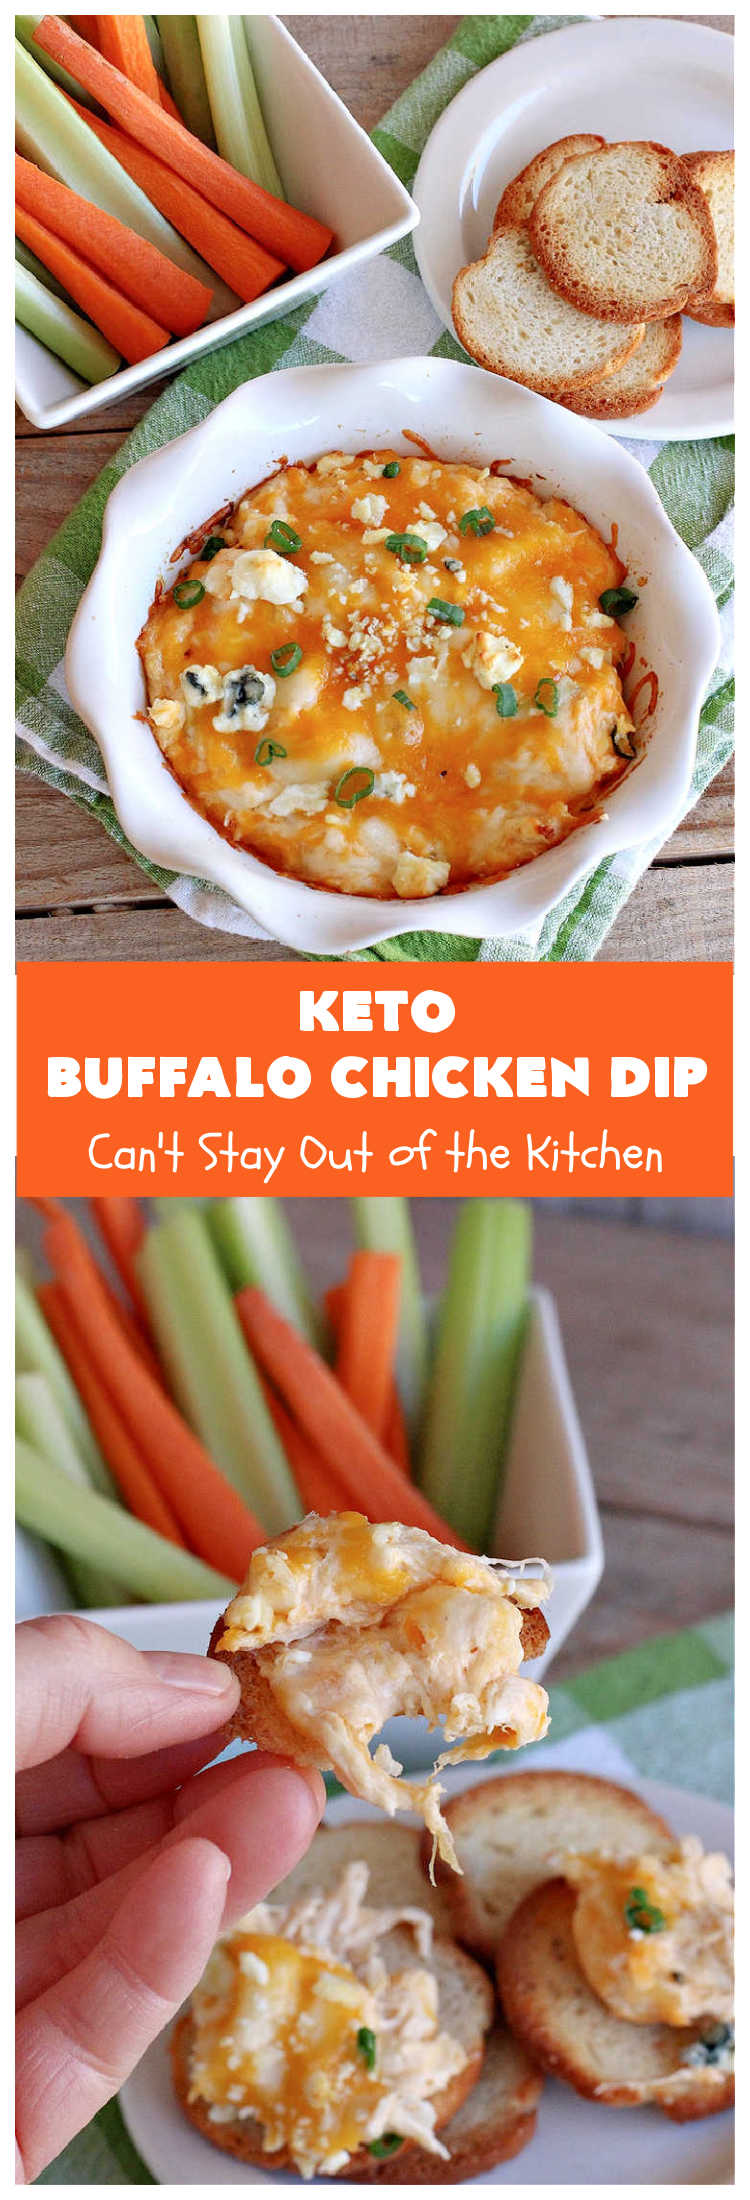 Keto Buffalo Chicken Dip | Can't Stay Out of the Kitchen | this amazing #appetizer uses 4 cheeses! #CheddarCheese, #MozzarellaCheese, #CreamCheese & #BlueCheese. It's unbelievably mouthwatering & #Keto-friendly. If you love #BuffaloChicken you'll find #KetoBuffaloChickenDip irresistible. #chicken #BuffaloChickenDip #tailgating #SuperBowl